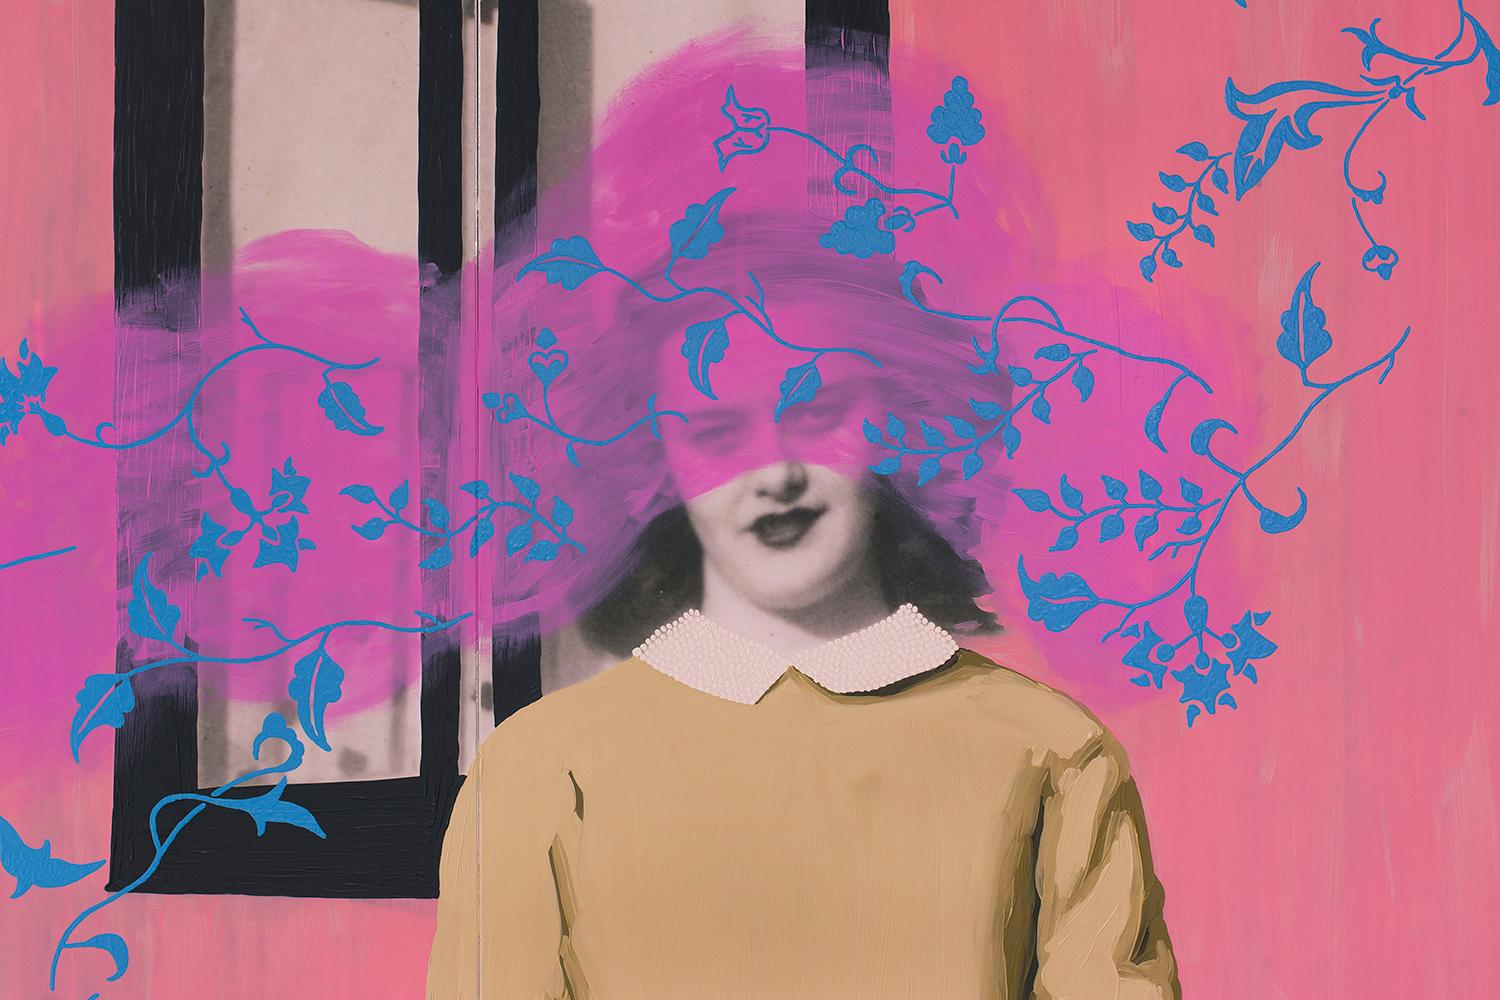 In Forgetting is so long, Daisy Patton collects abandoned, anonymous family photographs, enlarges them past their familiar size, and paints over them. She uses paint to disrupt, to reimagine, to re-enliven these individuals removed from their space